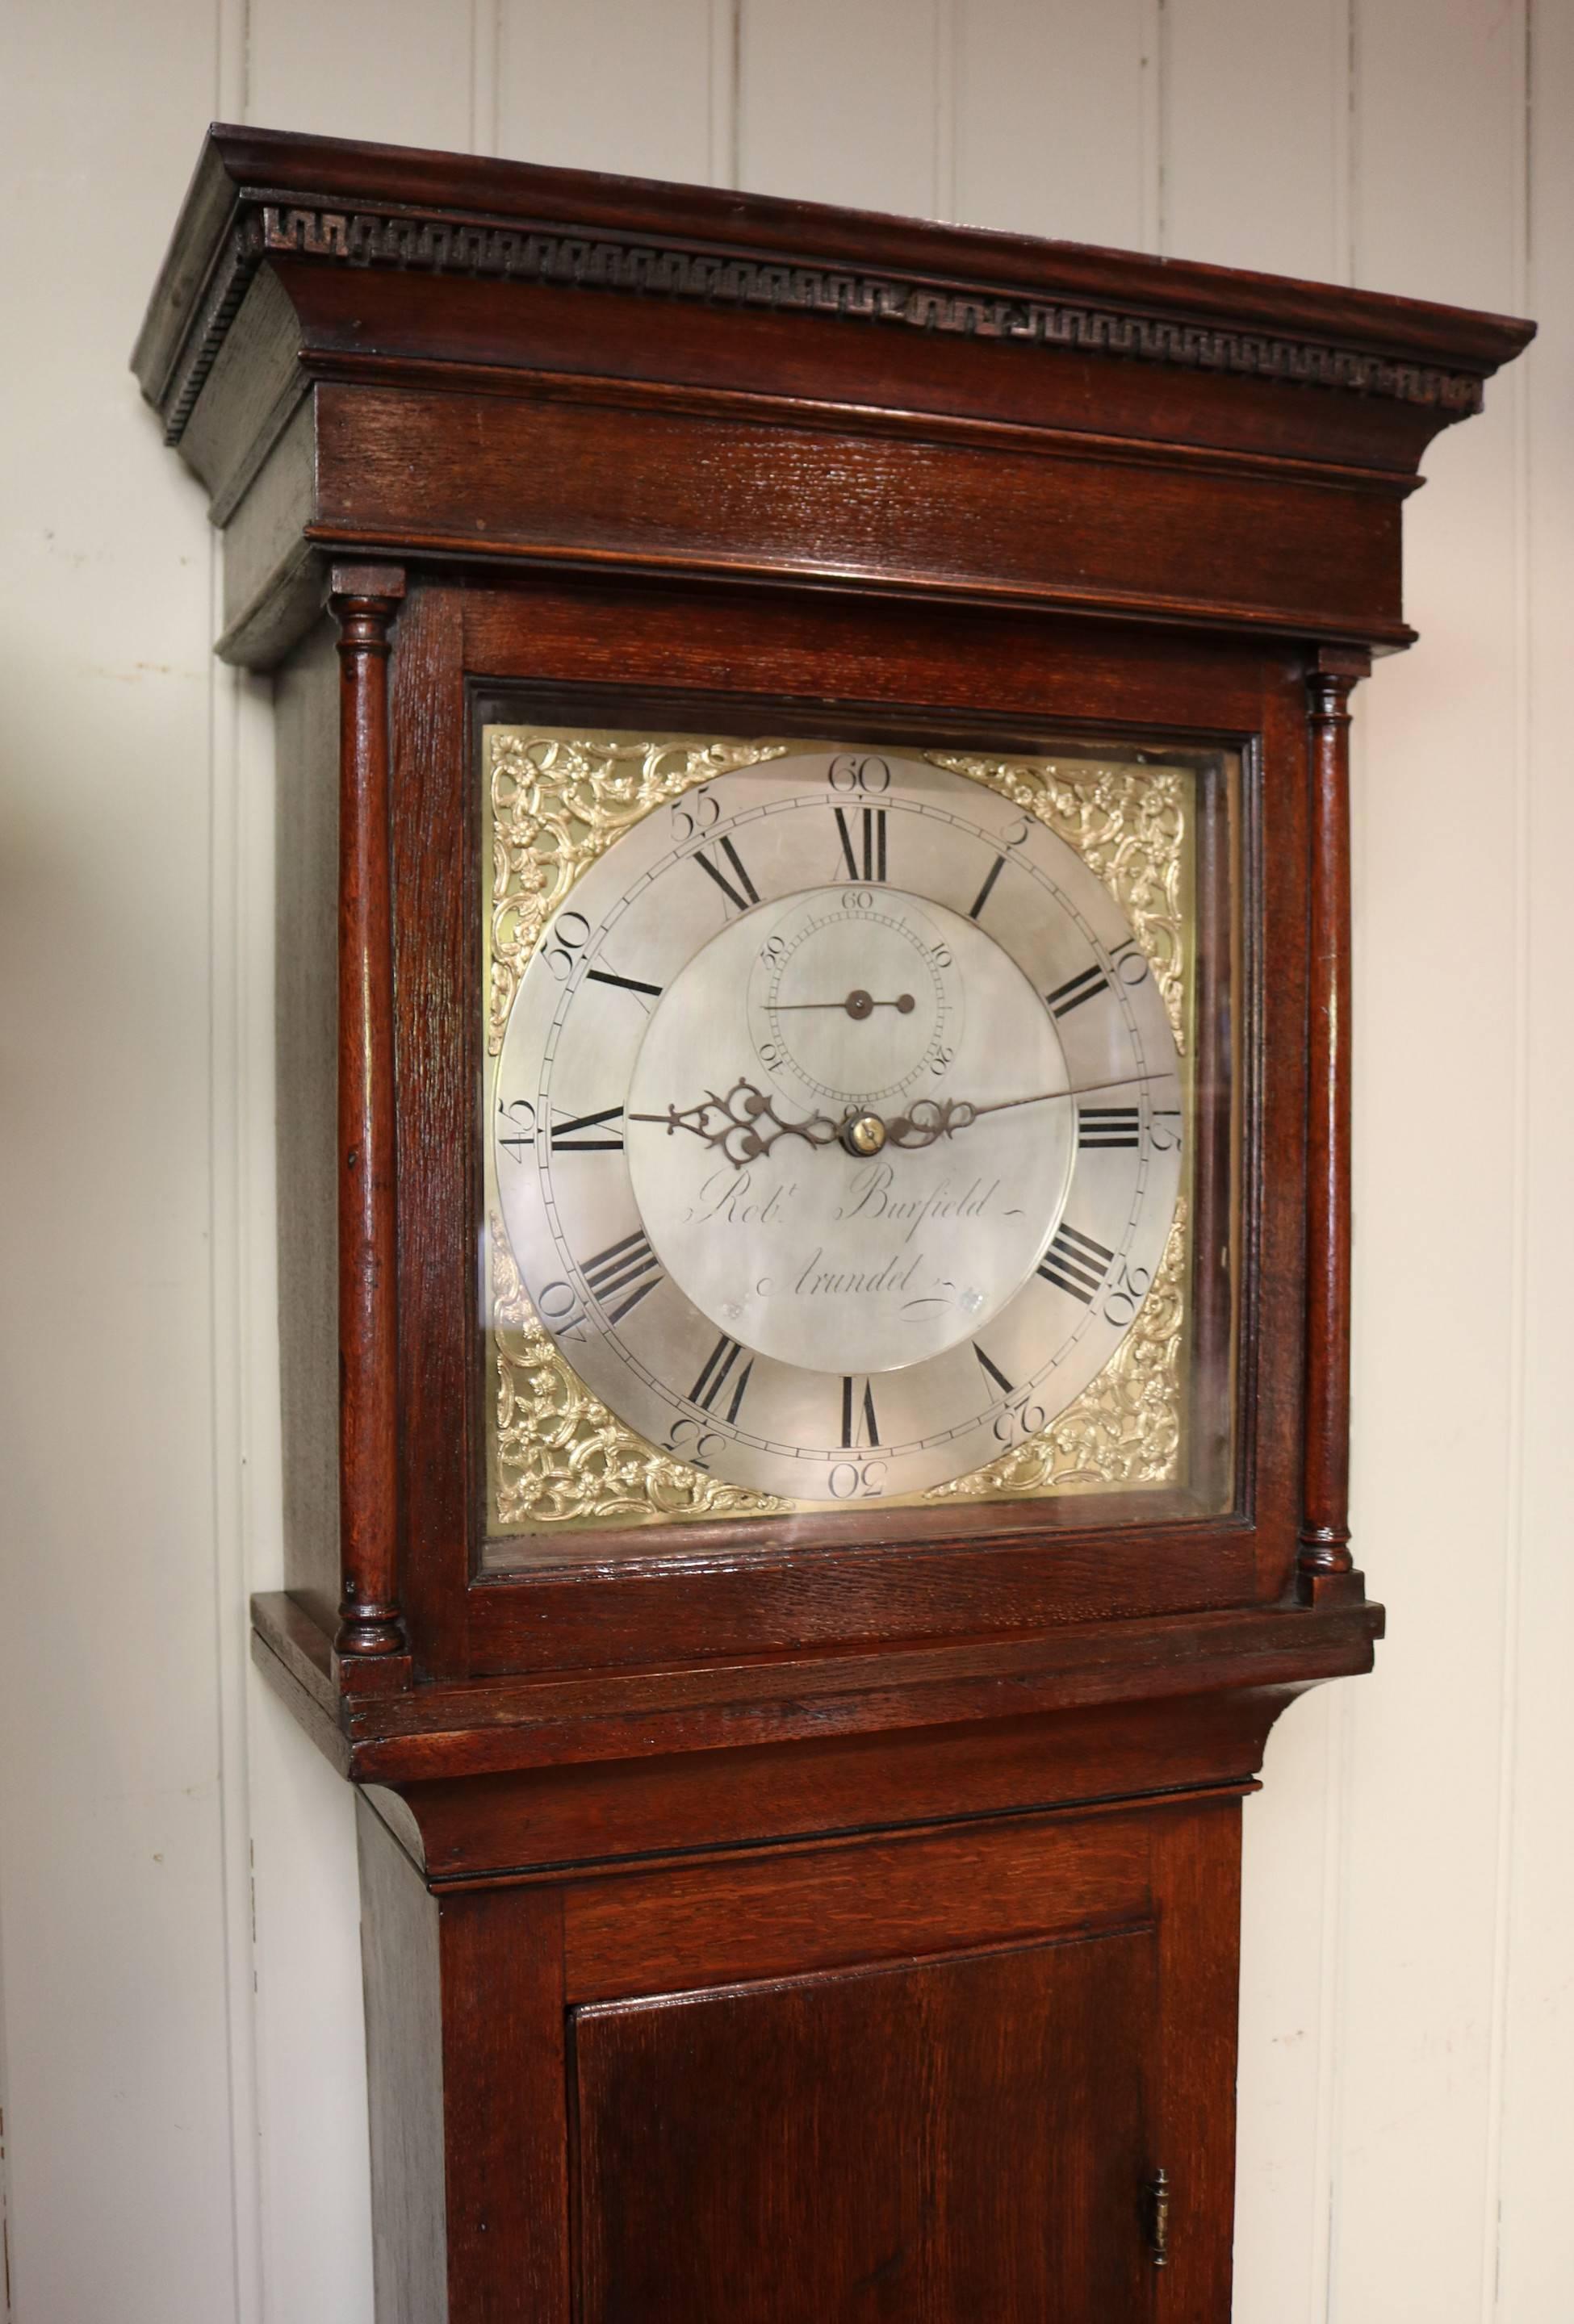 A very original Sussex made country longcase clock. The solid oak case has a dental top molding, turned side pillars and a long door. The brass dial has corner spandrels, a silvered chapter ring and a silvered centre, engraved with the makers name